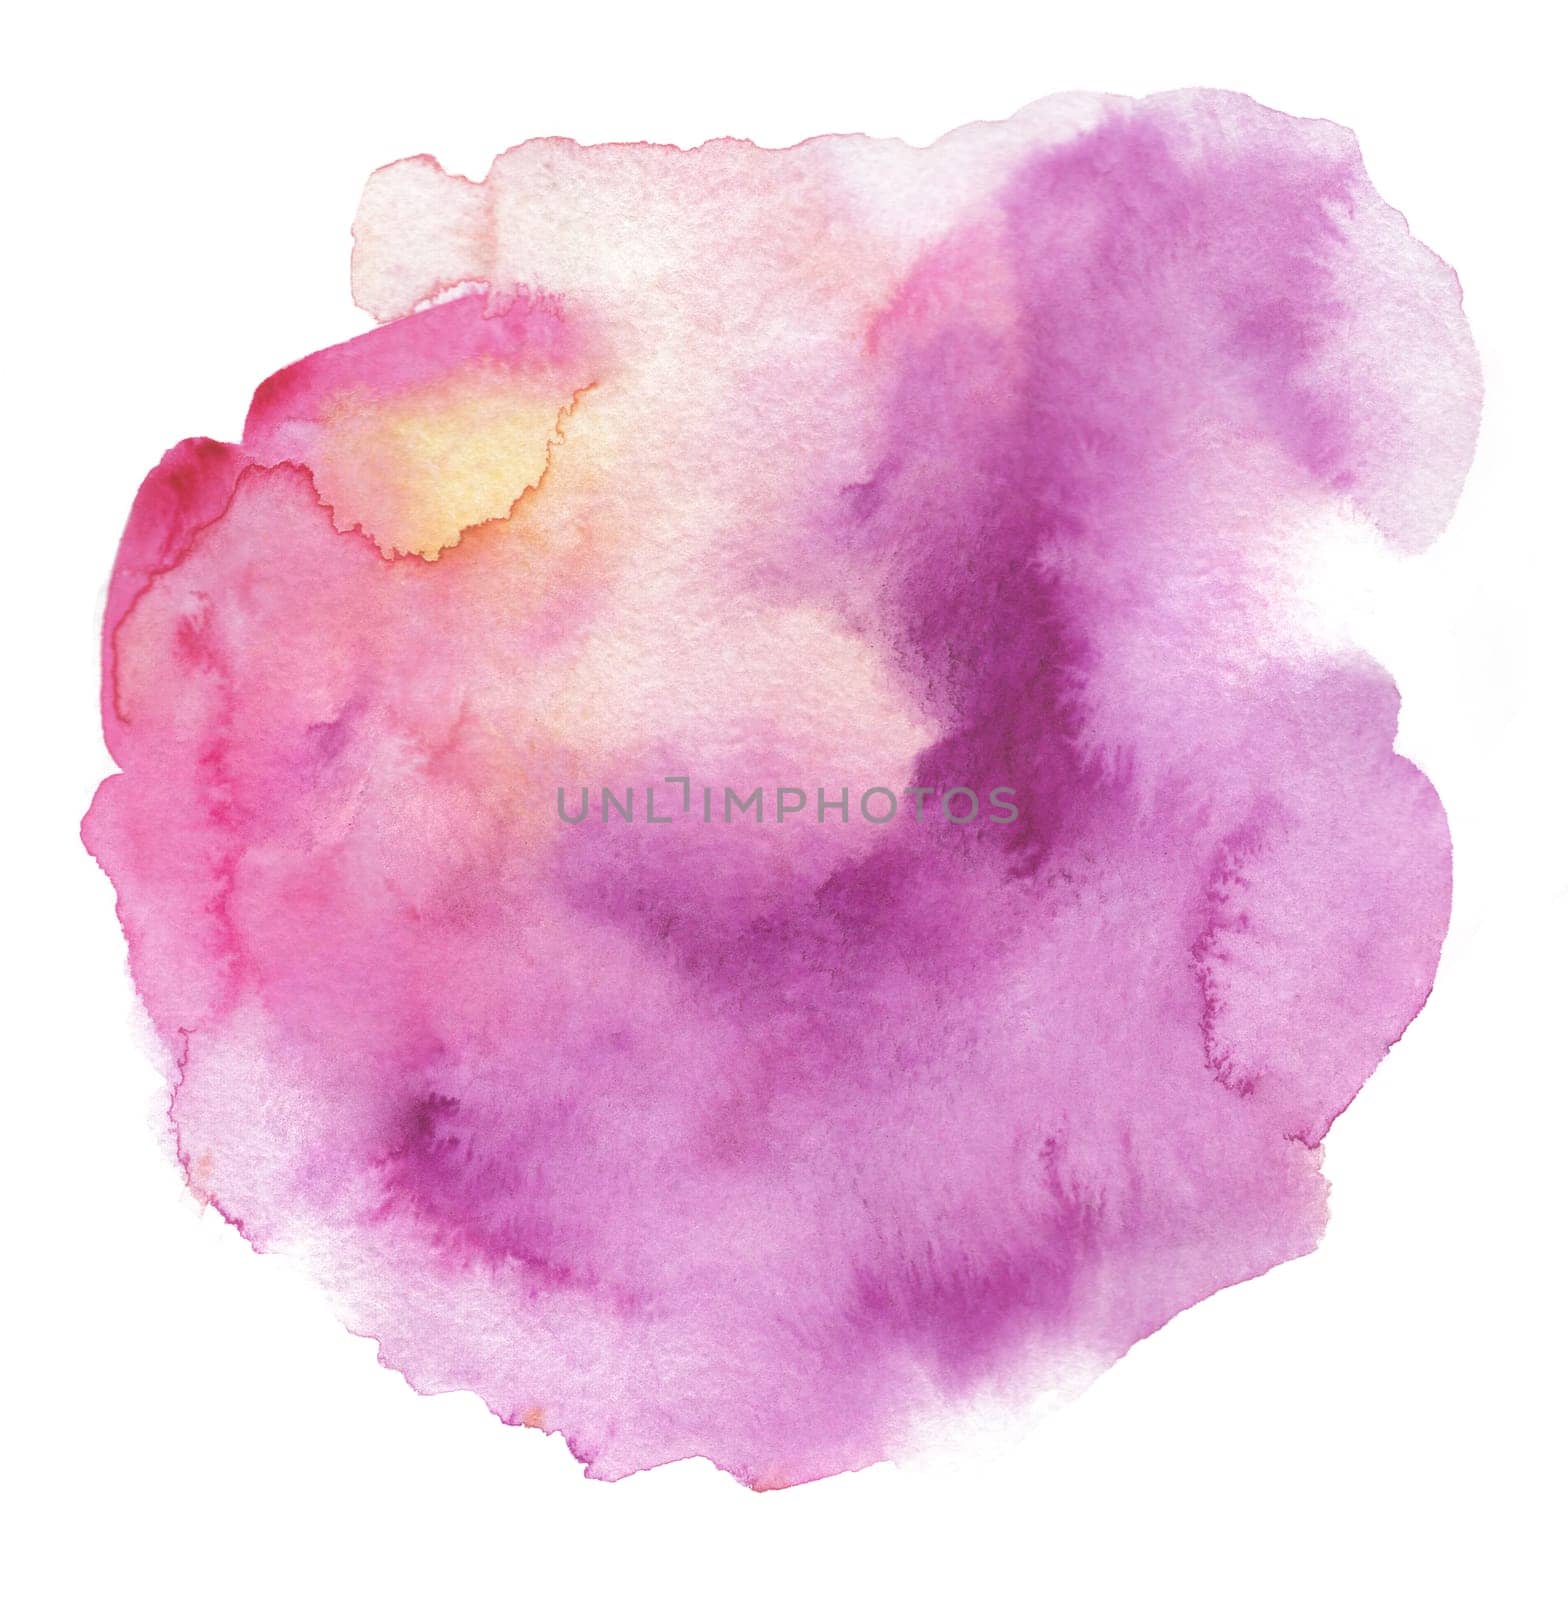 Abstract watercolor pink spot for creating backgrounds and designs isolated on white background